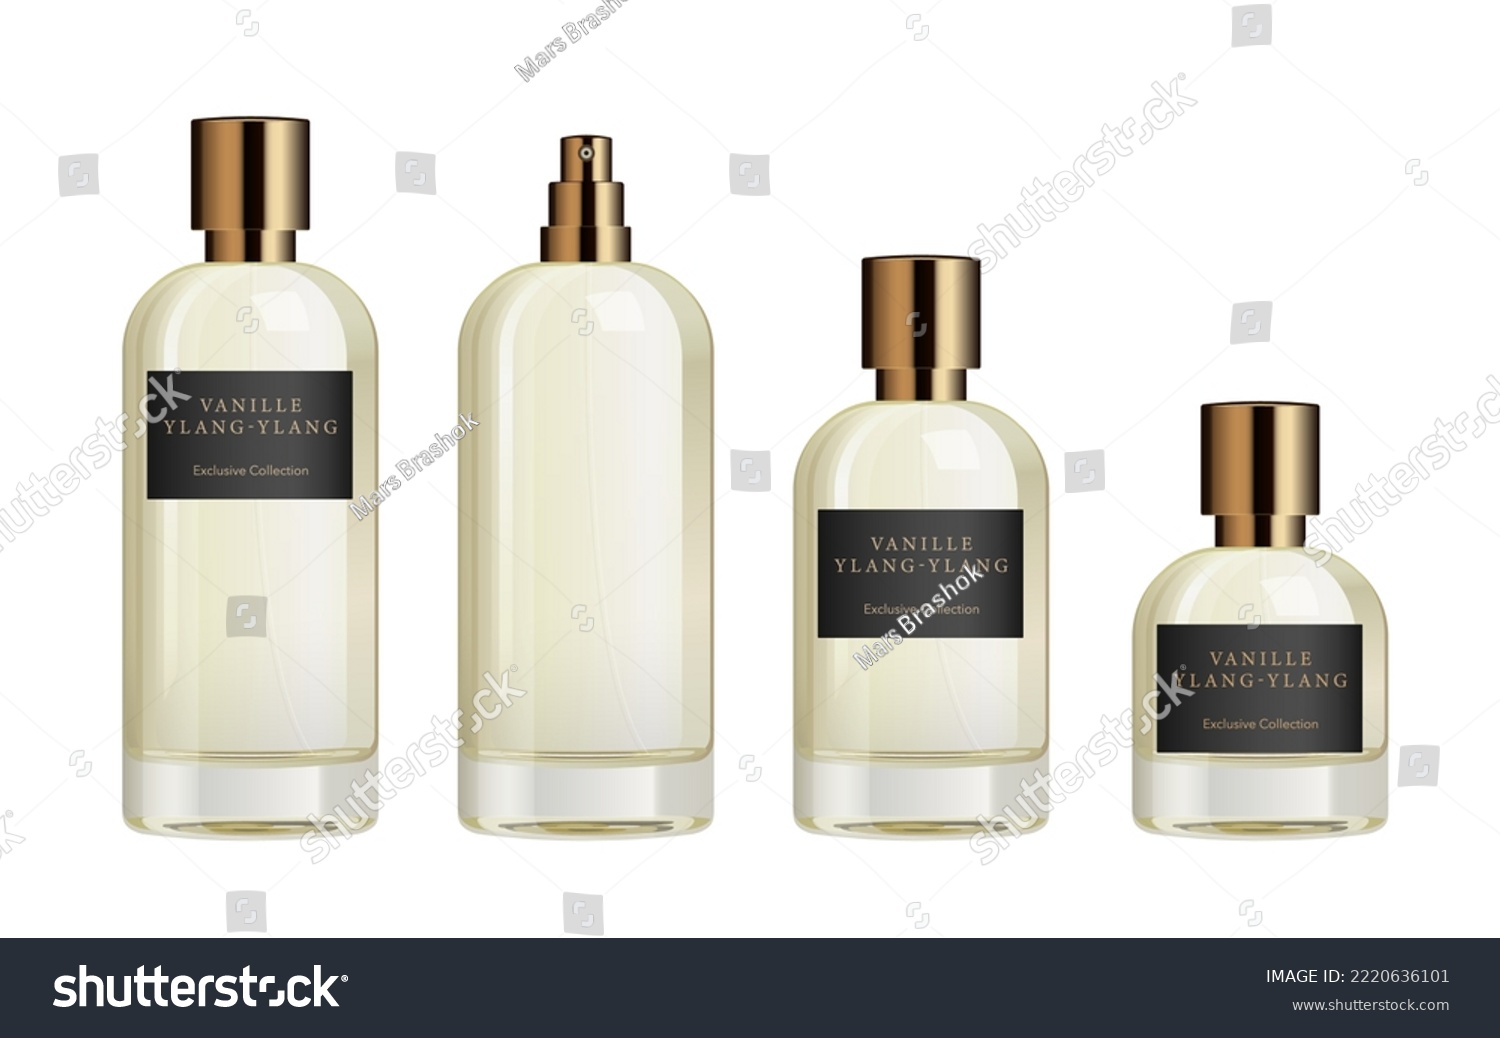 SVG of Perfume glass bottle template. Mockup of cylinder minimalist fragrance package in different sizes, with label, bronze sprayer and cap. 3d vector illustration isolated on white background. svg